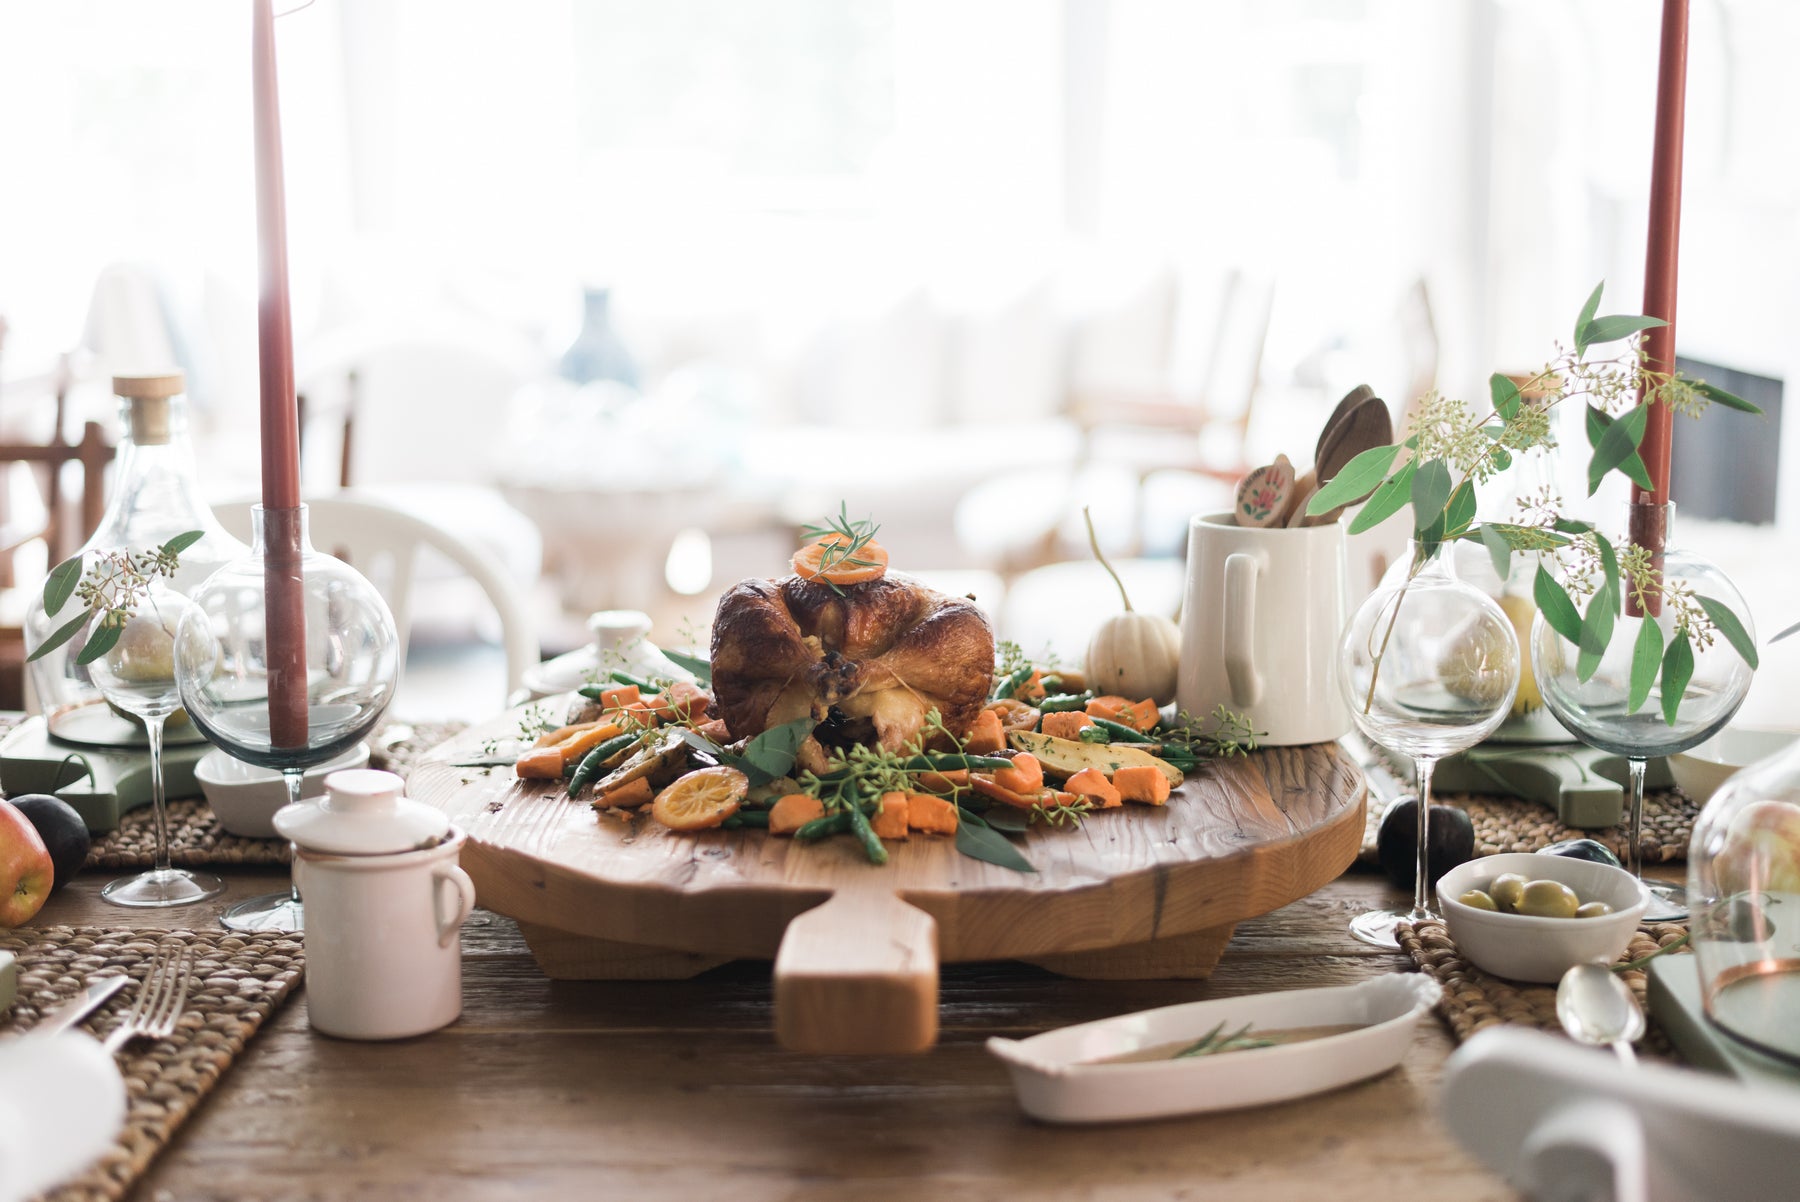 At Home with etúHOME: 3 Ways to Thanksgiving in 2020